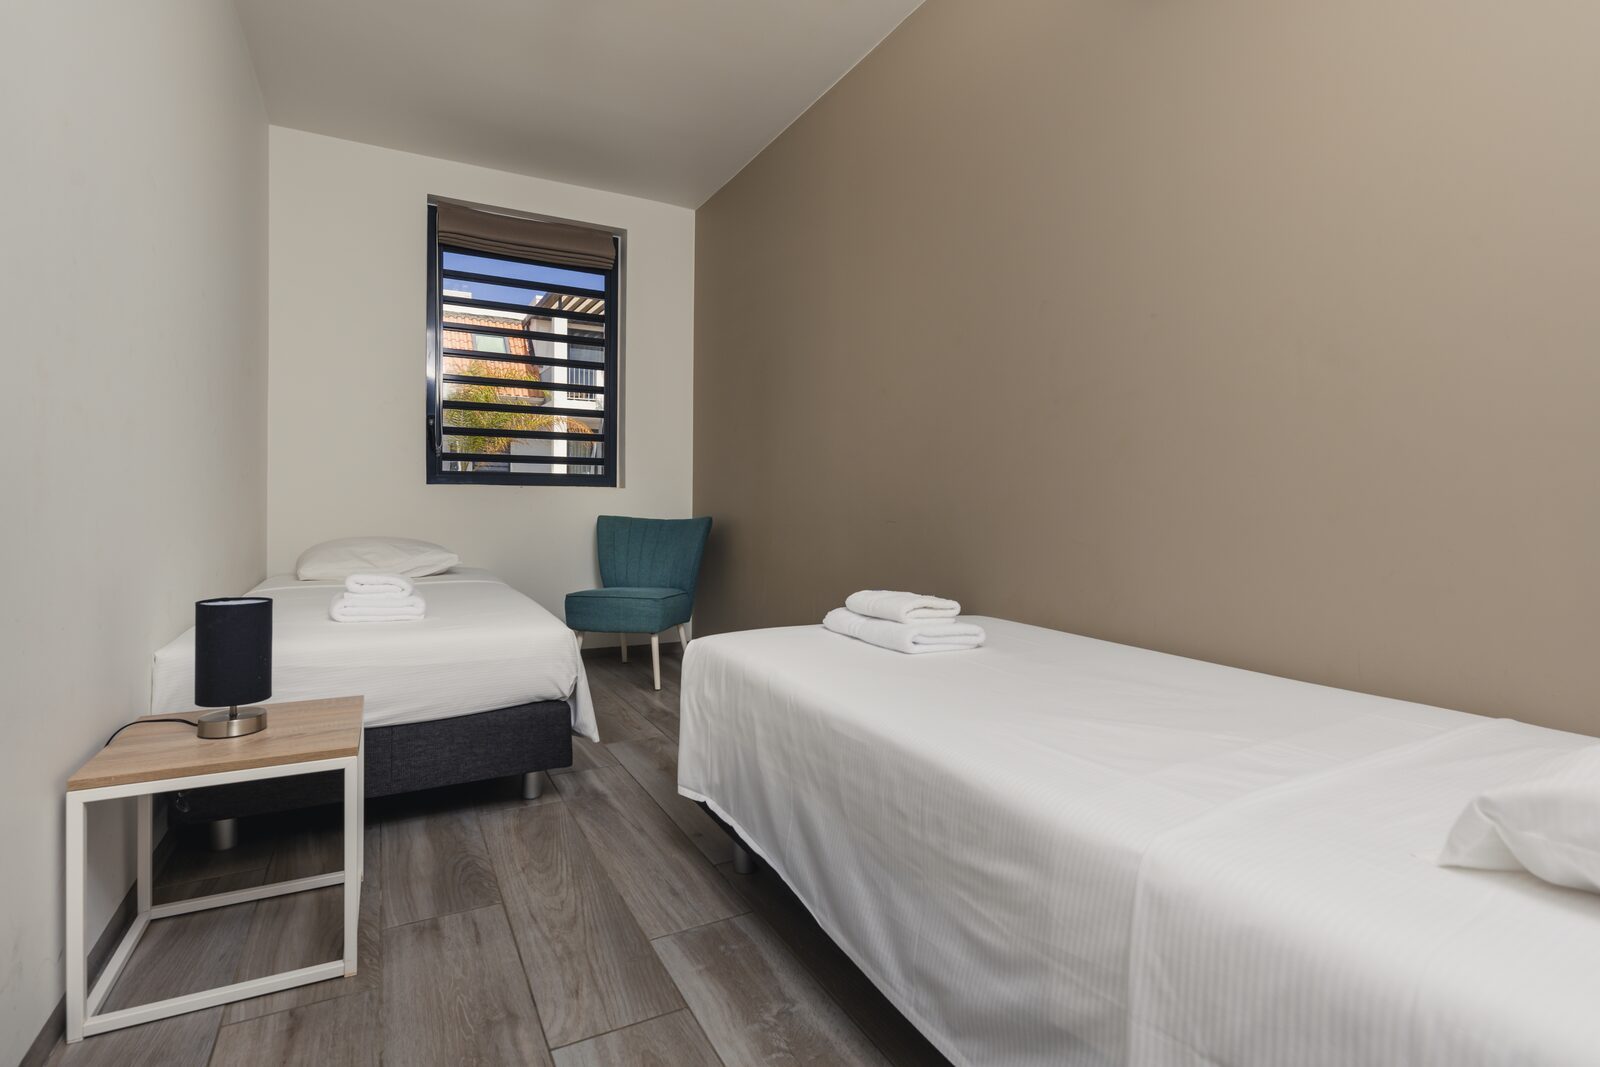 Resort Bonaire offers spacious bedrooms connected to the balcony. View our available accommodations!